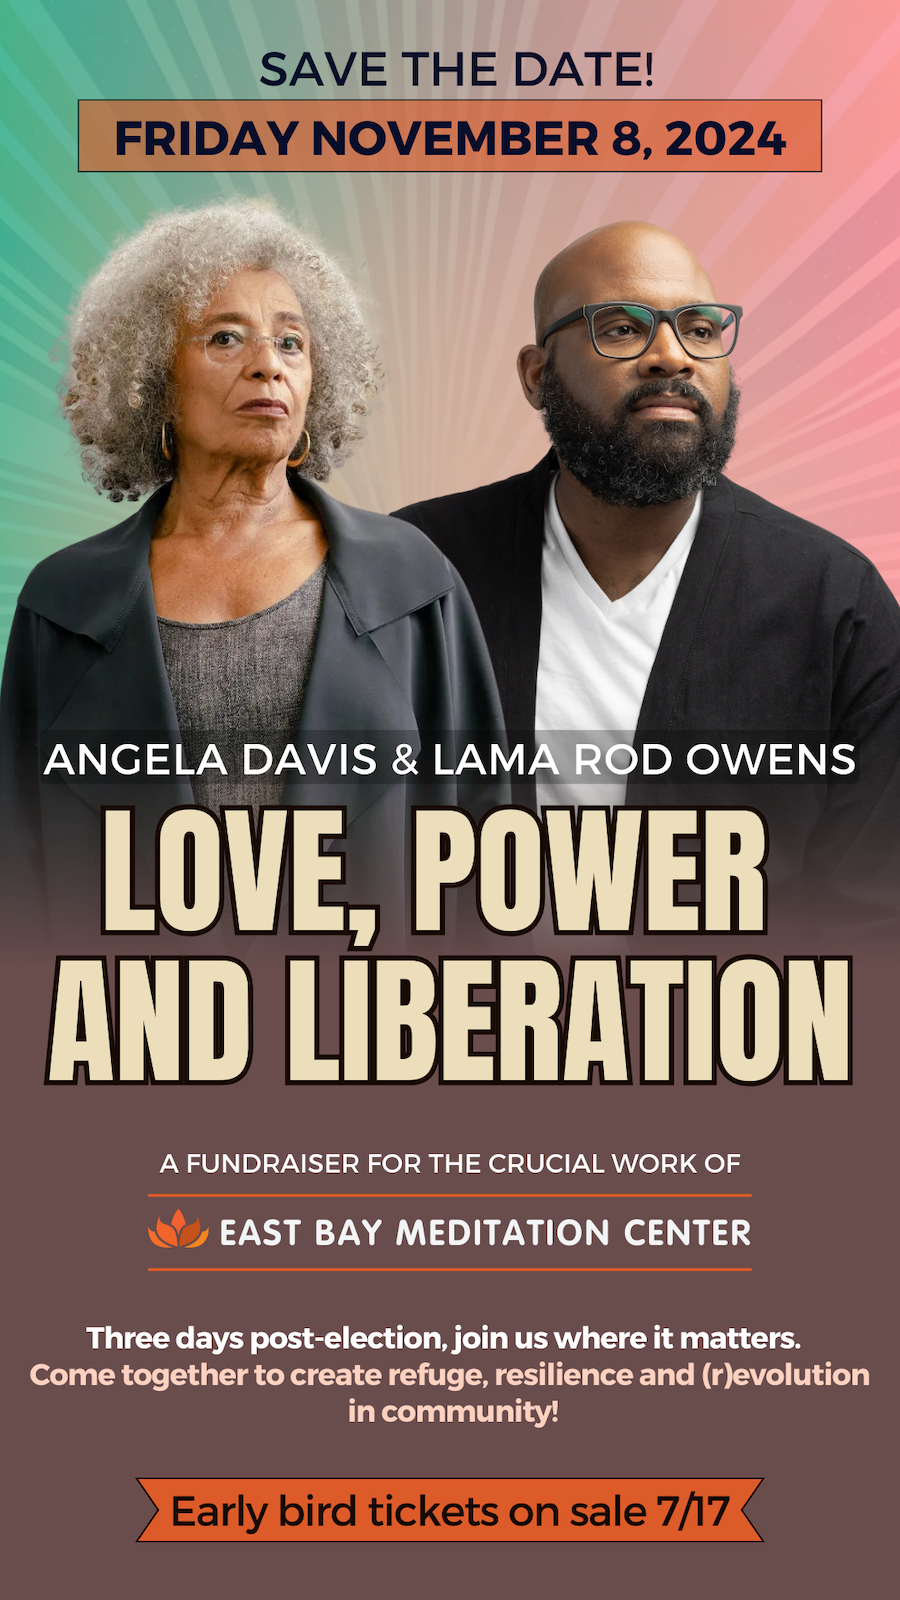 Angela Davis and Lama Rod Owens against a multicolored background with text underneath